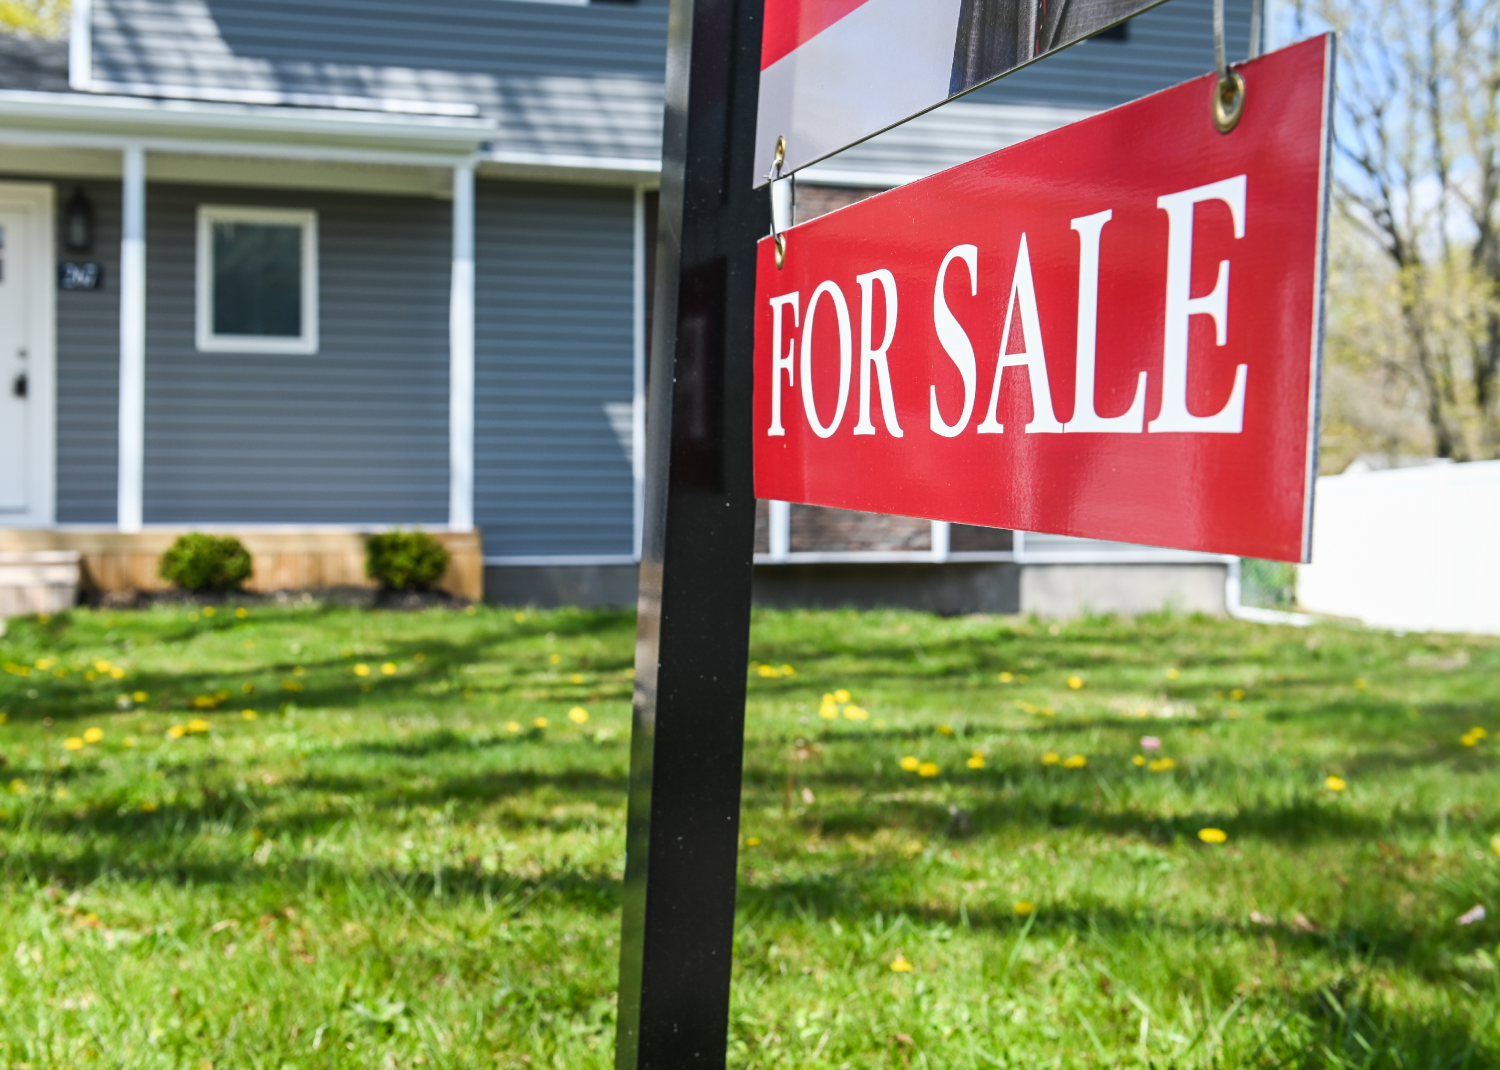 Photograph of a “For Sale” sign in front of a house - Newsday LLC // Getty Images